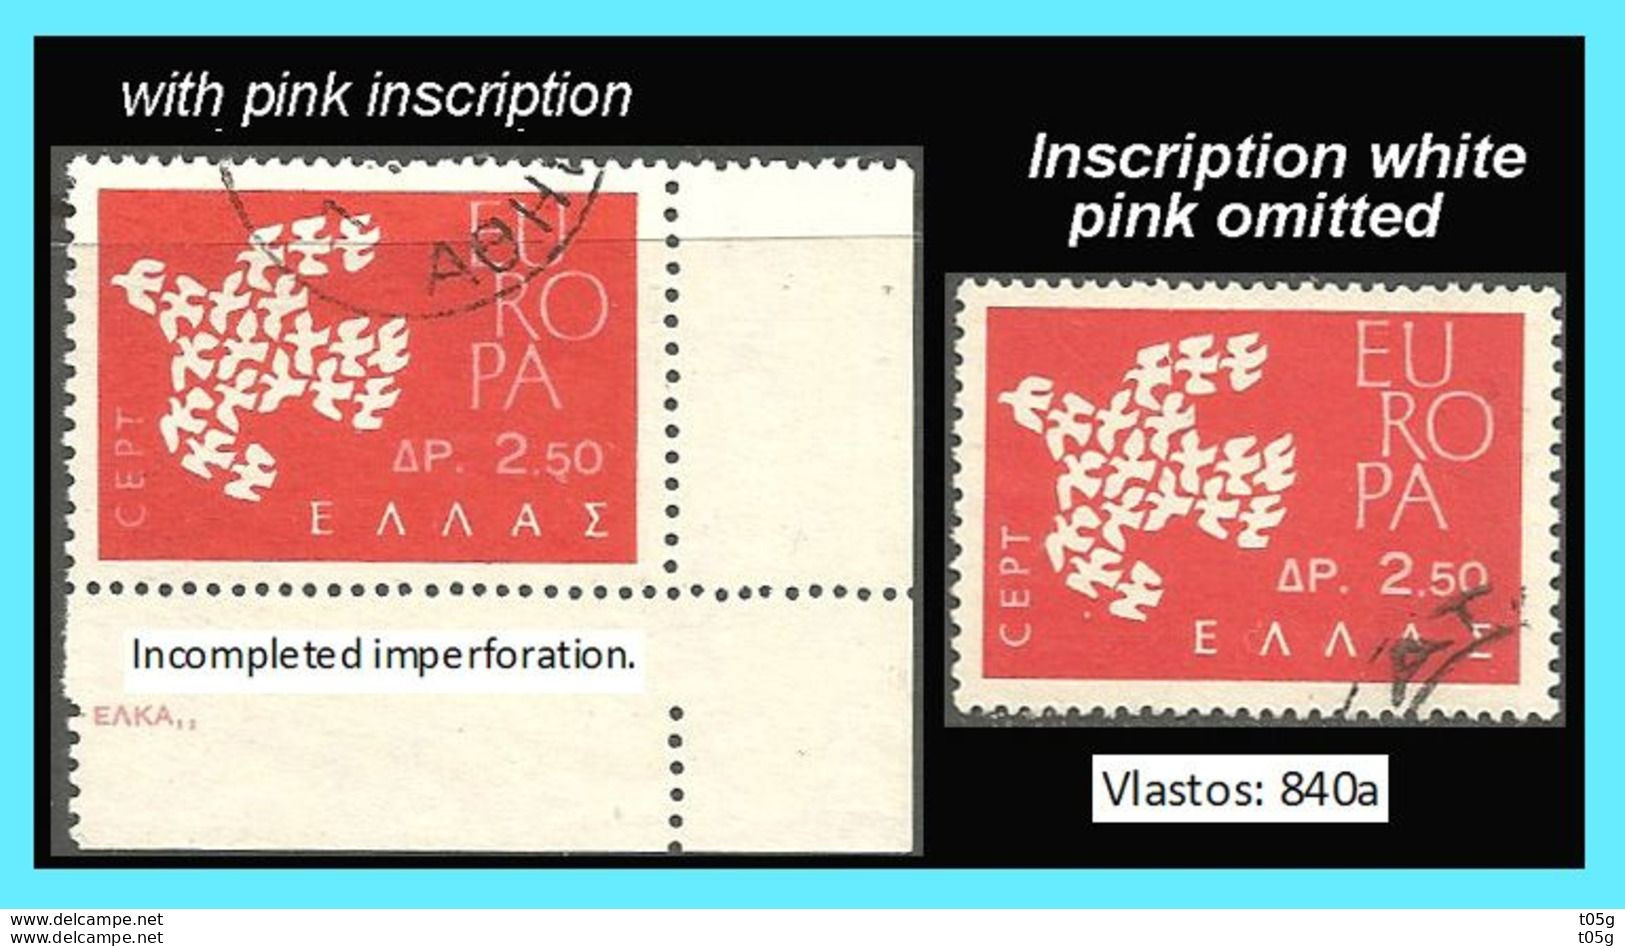 GREECE-GRECe - HELLAS -EUROPA CEPT 1961: 2.50drx Inscription White, Pink Omitted Used - Oblitérés